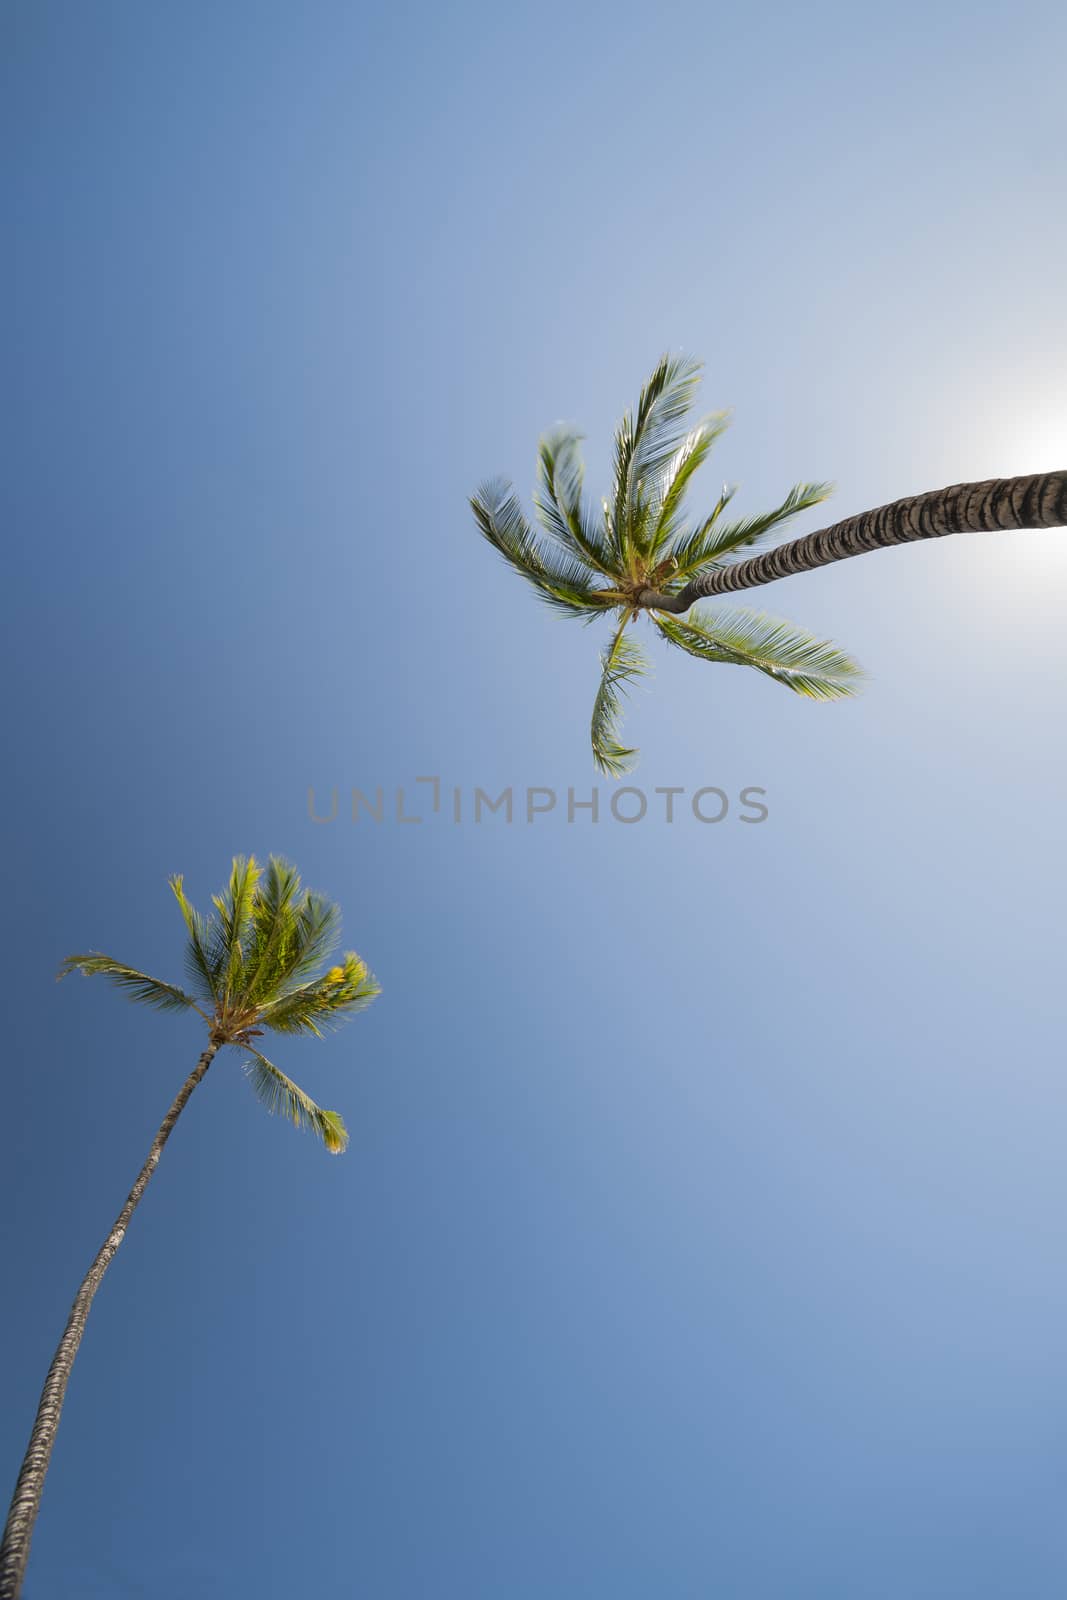 two Palm trees, low angle view against blue sky. by brians101